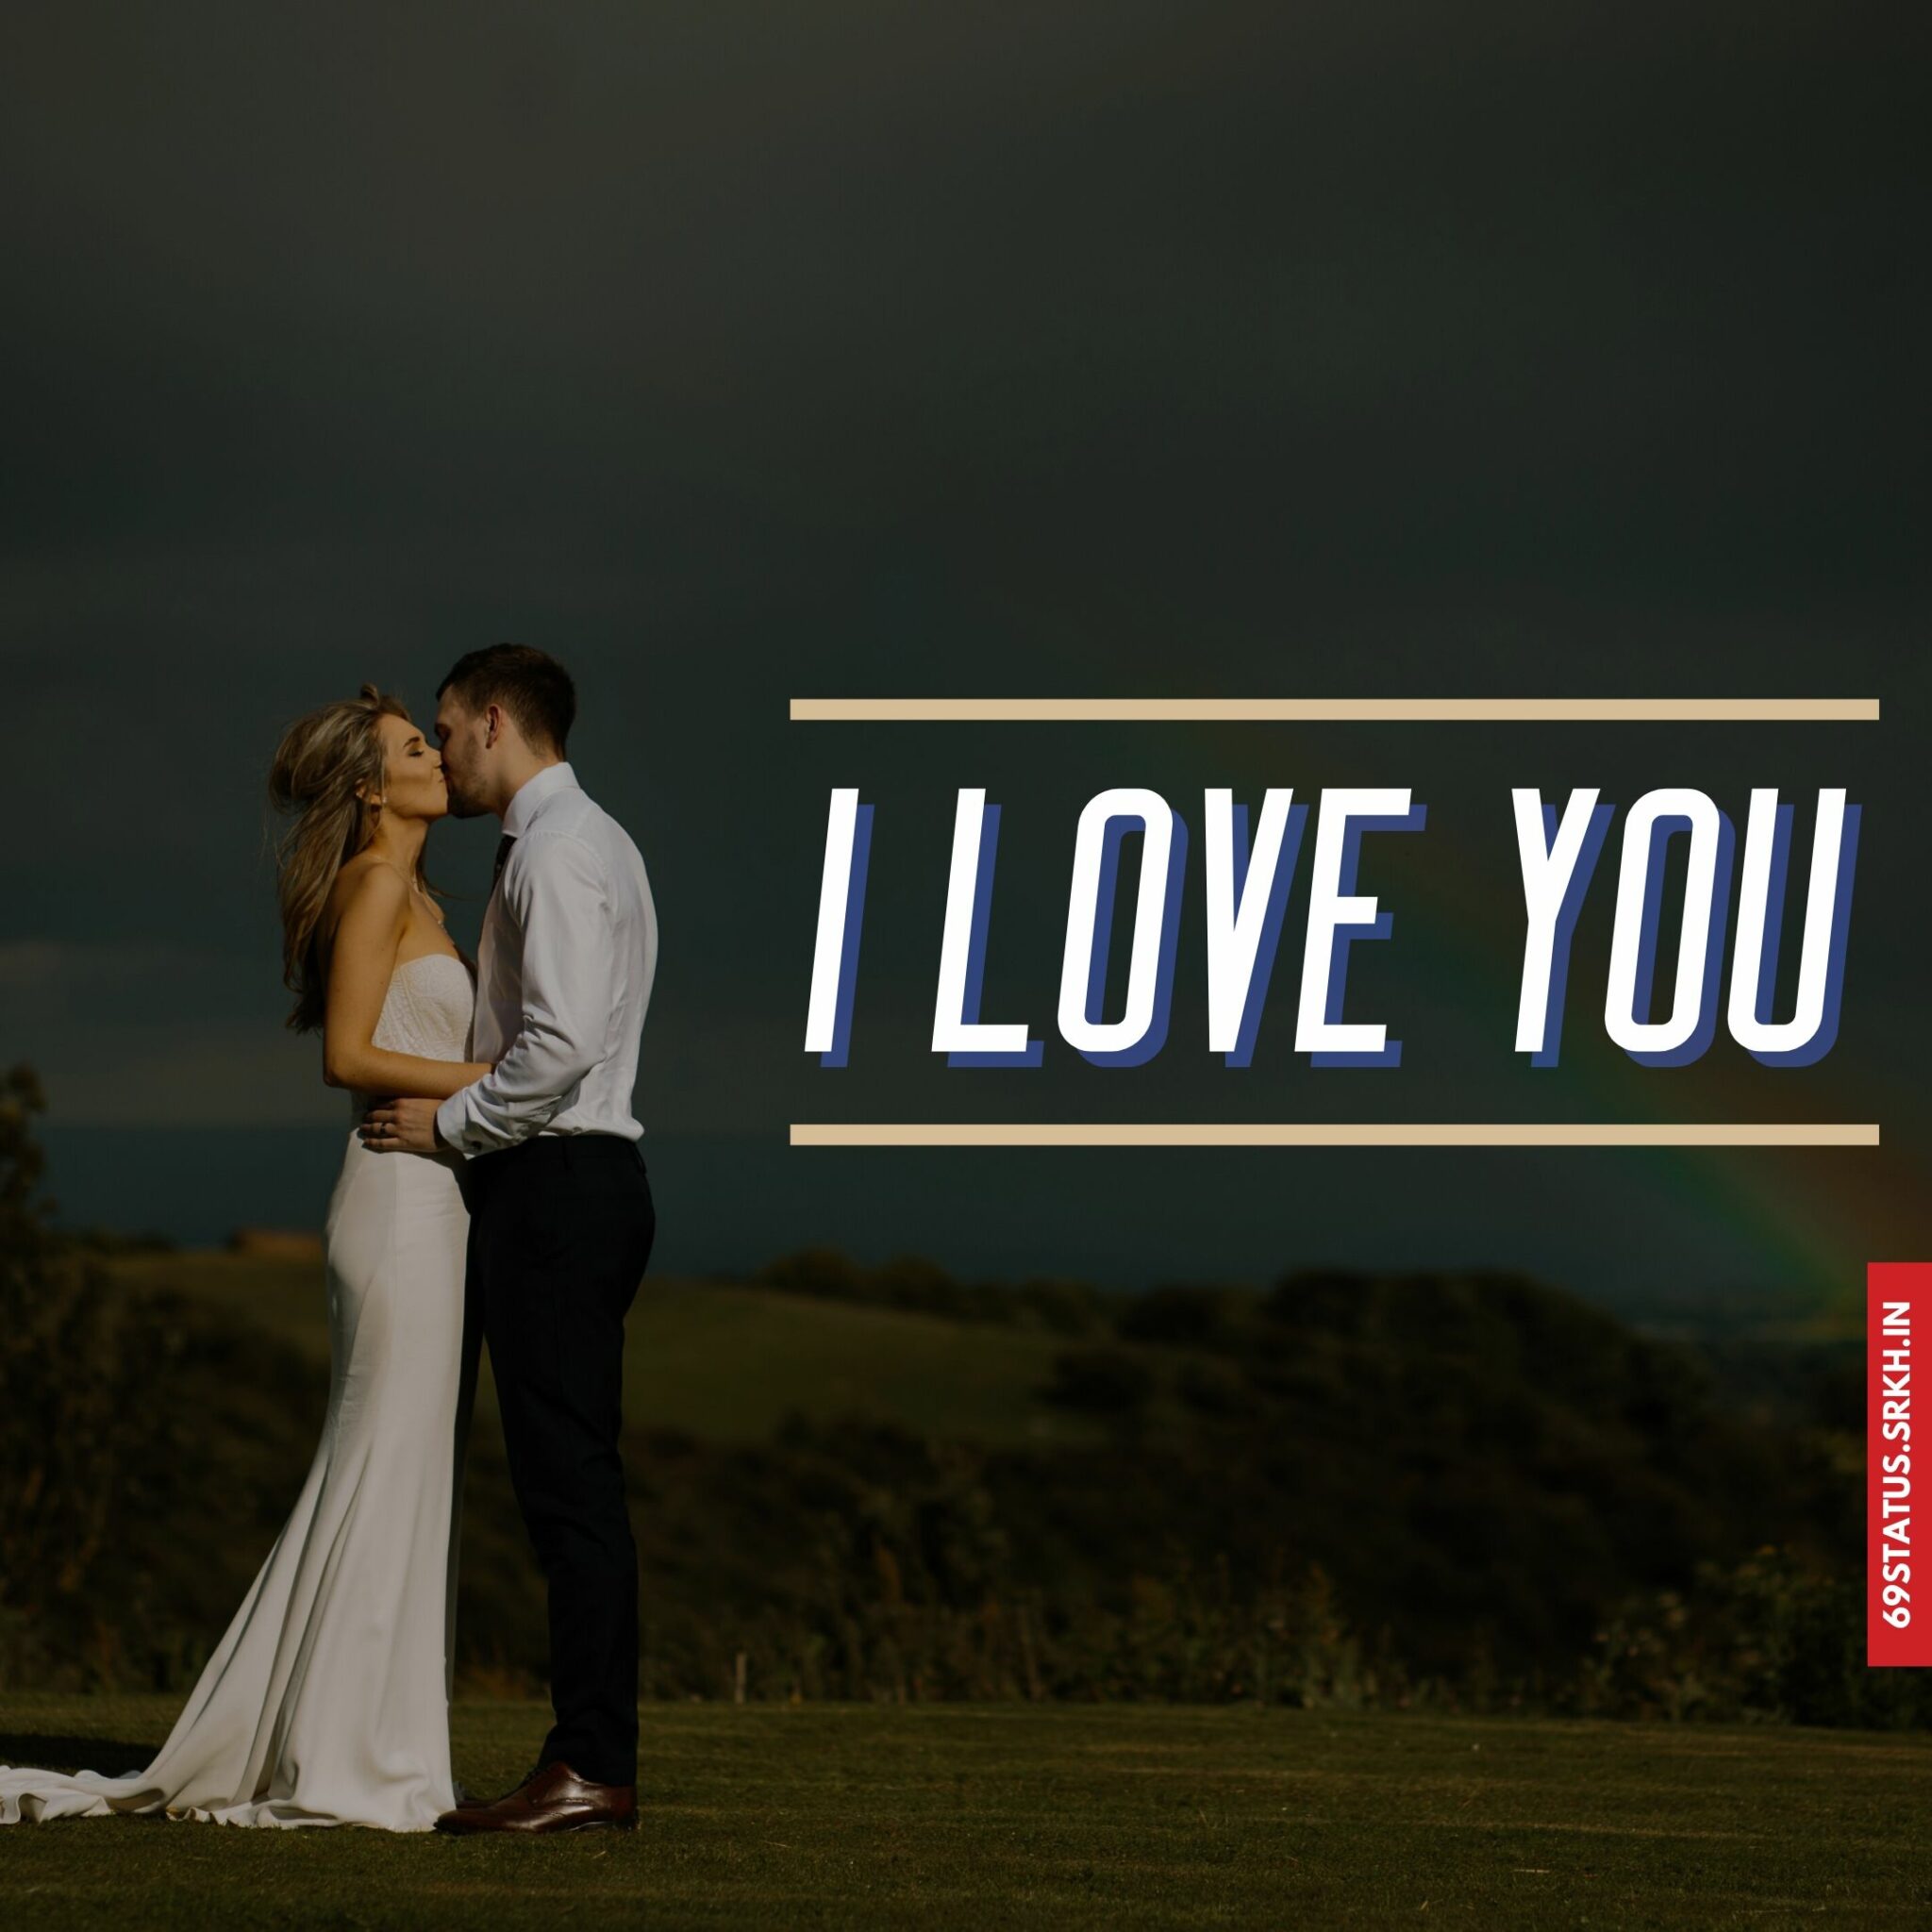 Images I Love You hd